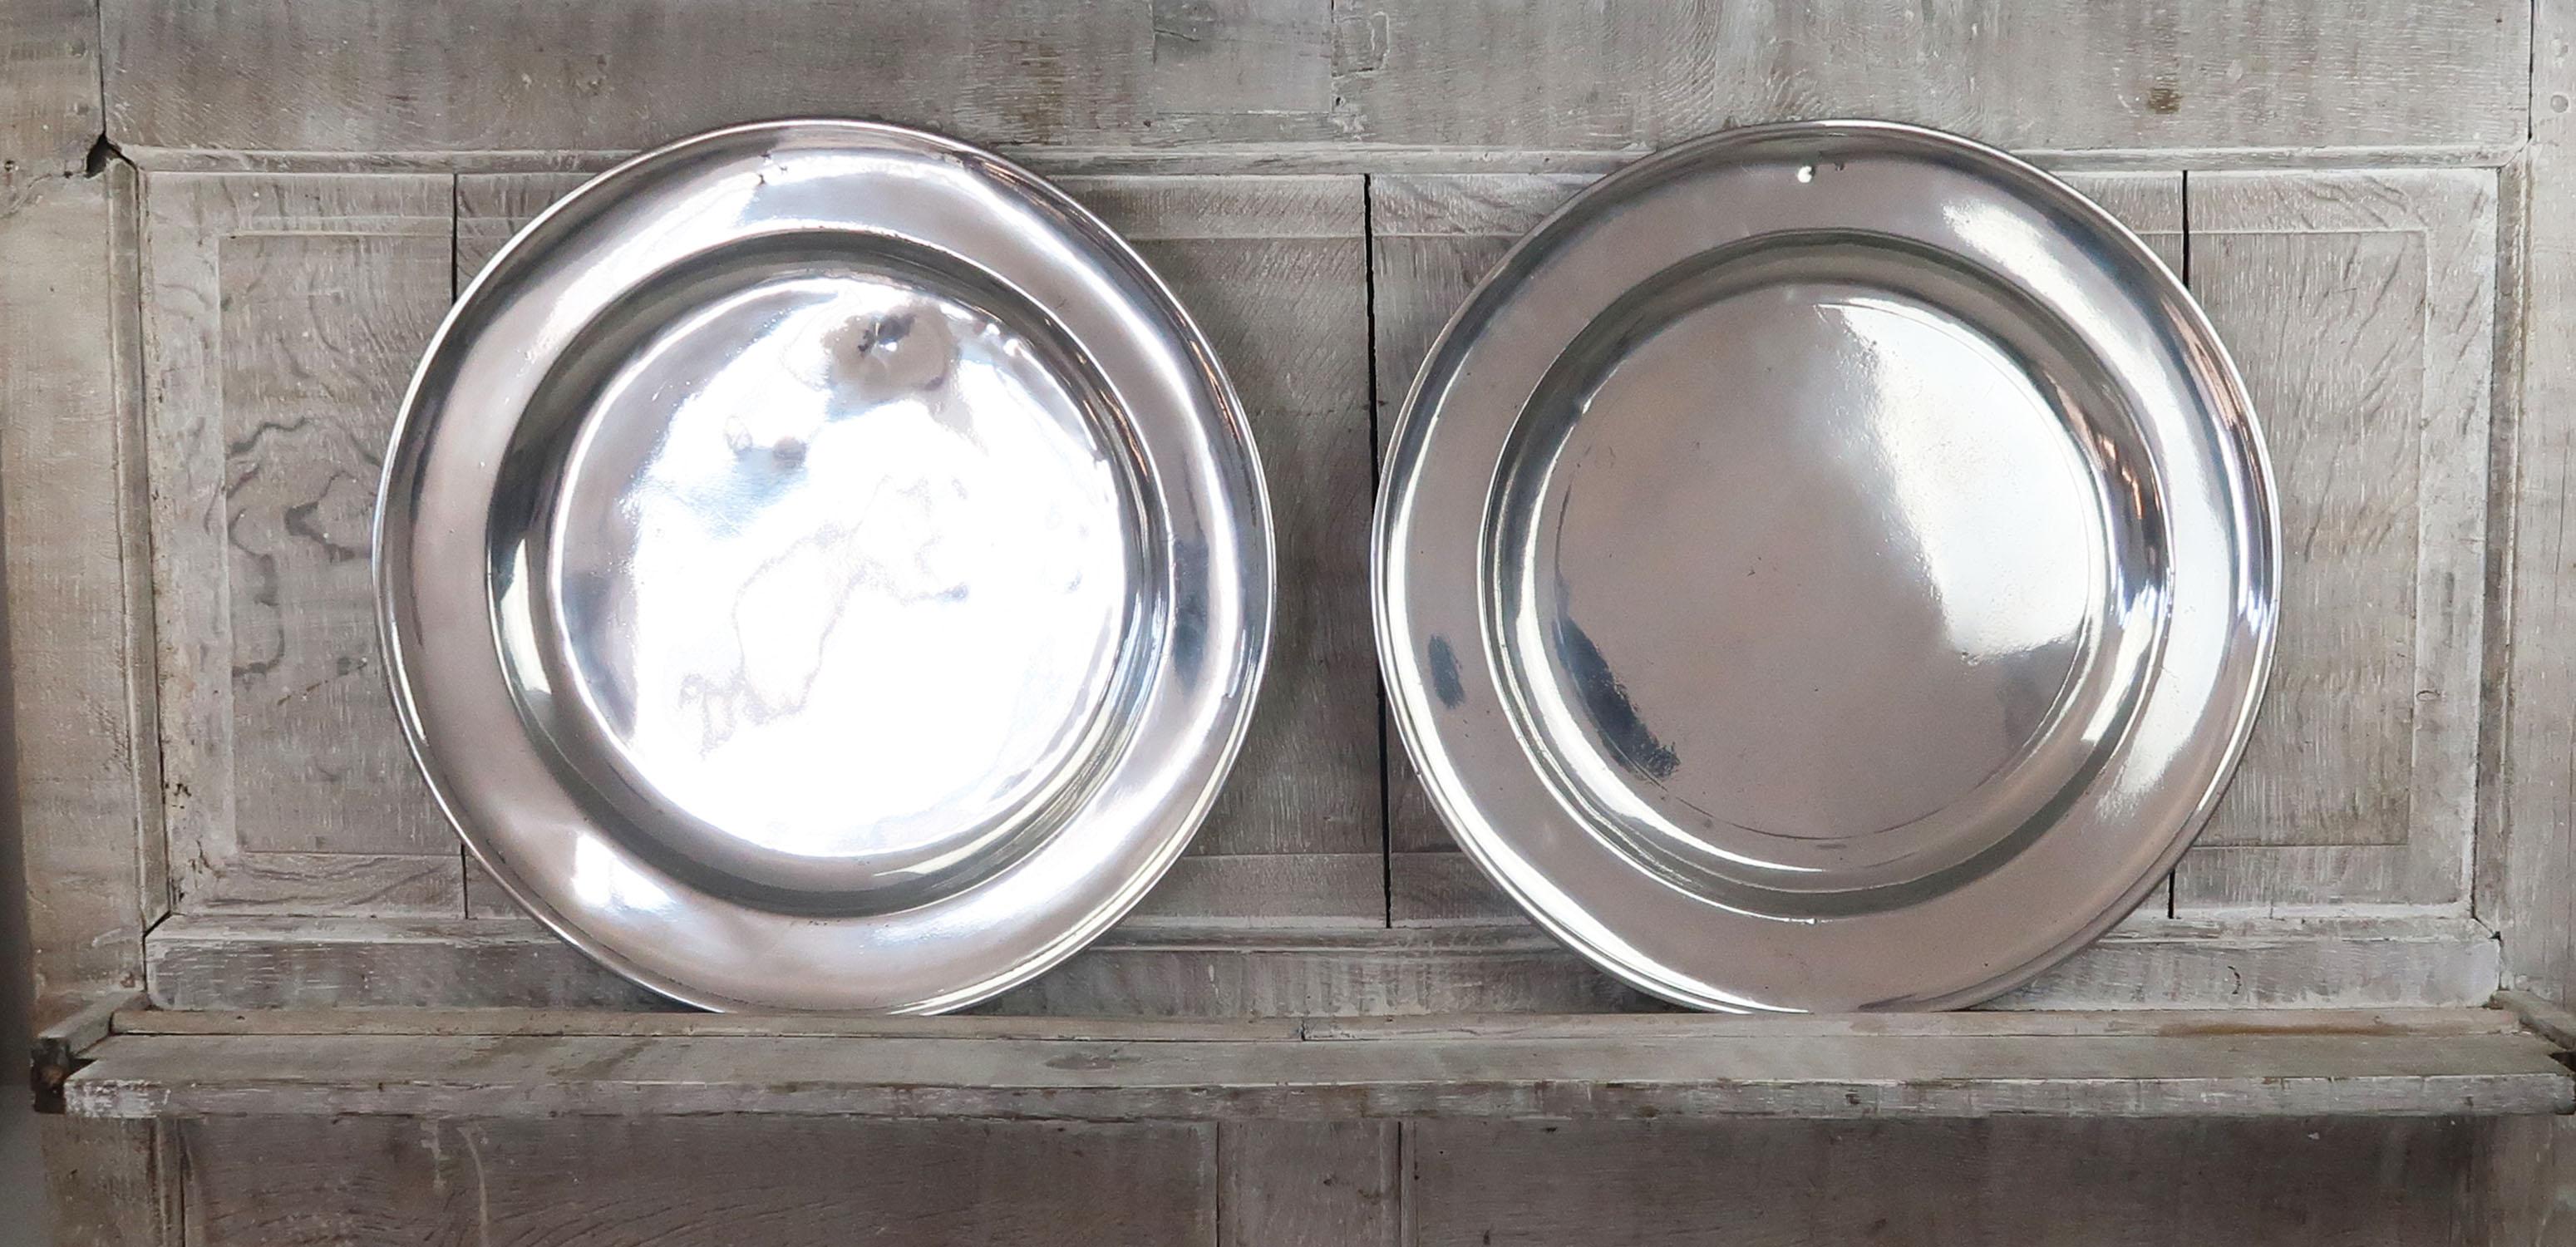 2 great highly polished pewter chargers. Measure: (18 inches).

English, late 18th century

The same ownership inscription on the front rim of both of them.

Rubbed touch marks on the underside. Probably a London maker.

The pewter has been